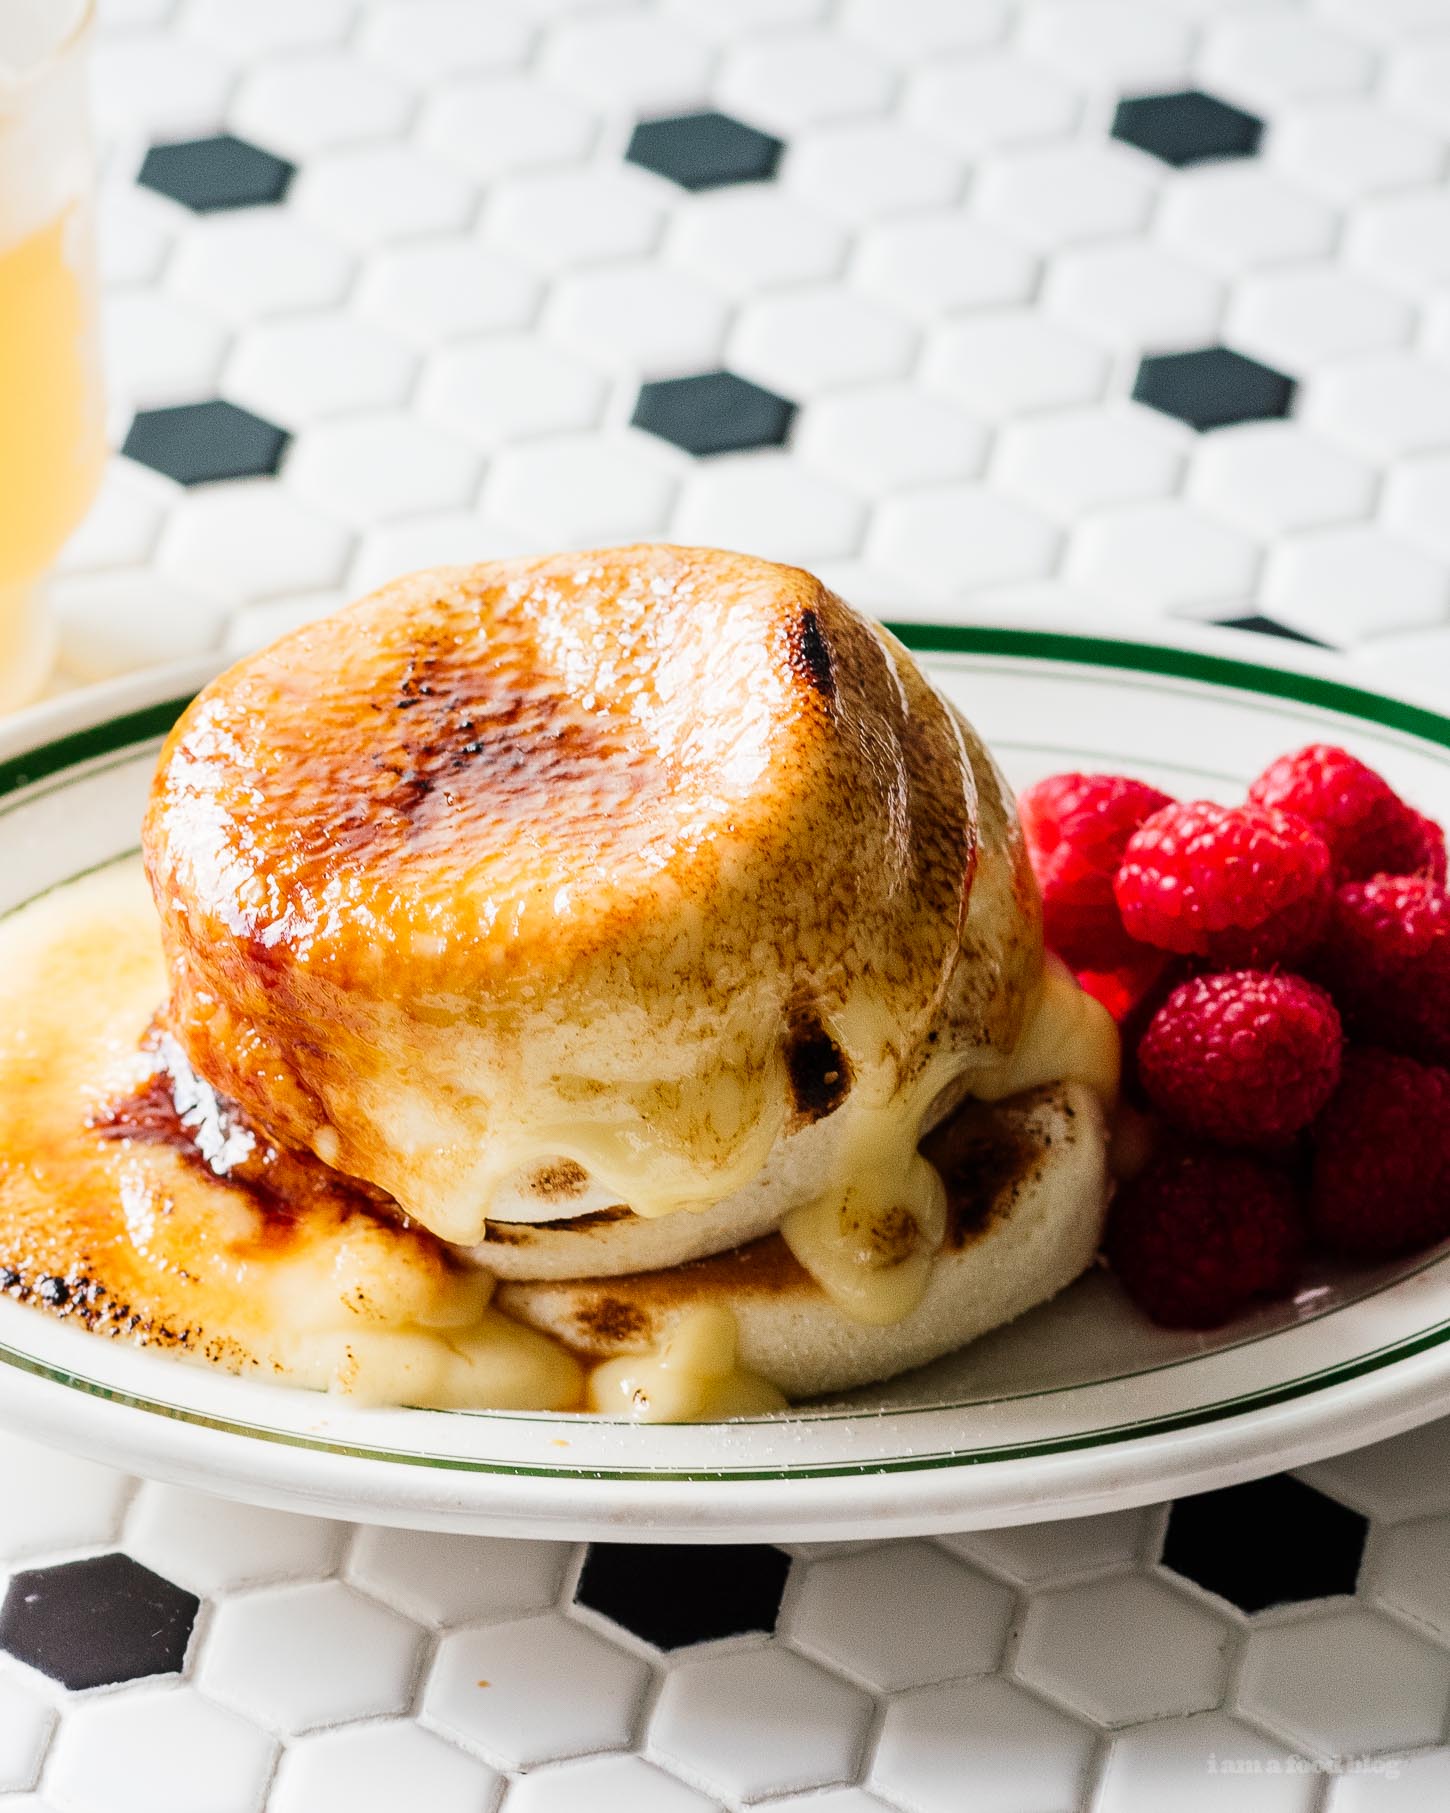 Do you want to eat fluffy Japanese soufflé creme brûlée pancakes but don’t want to fly to Hong Kong or wait in a line for hours? This recipe is for you! Make the fluffy pancakes of your dreams, tall and fluffy with a creme brûlée crackling sugar crust. #pancakes #japanesepancakes #soufflepancakes #recipes #brunch